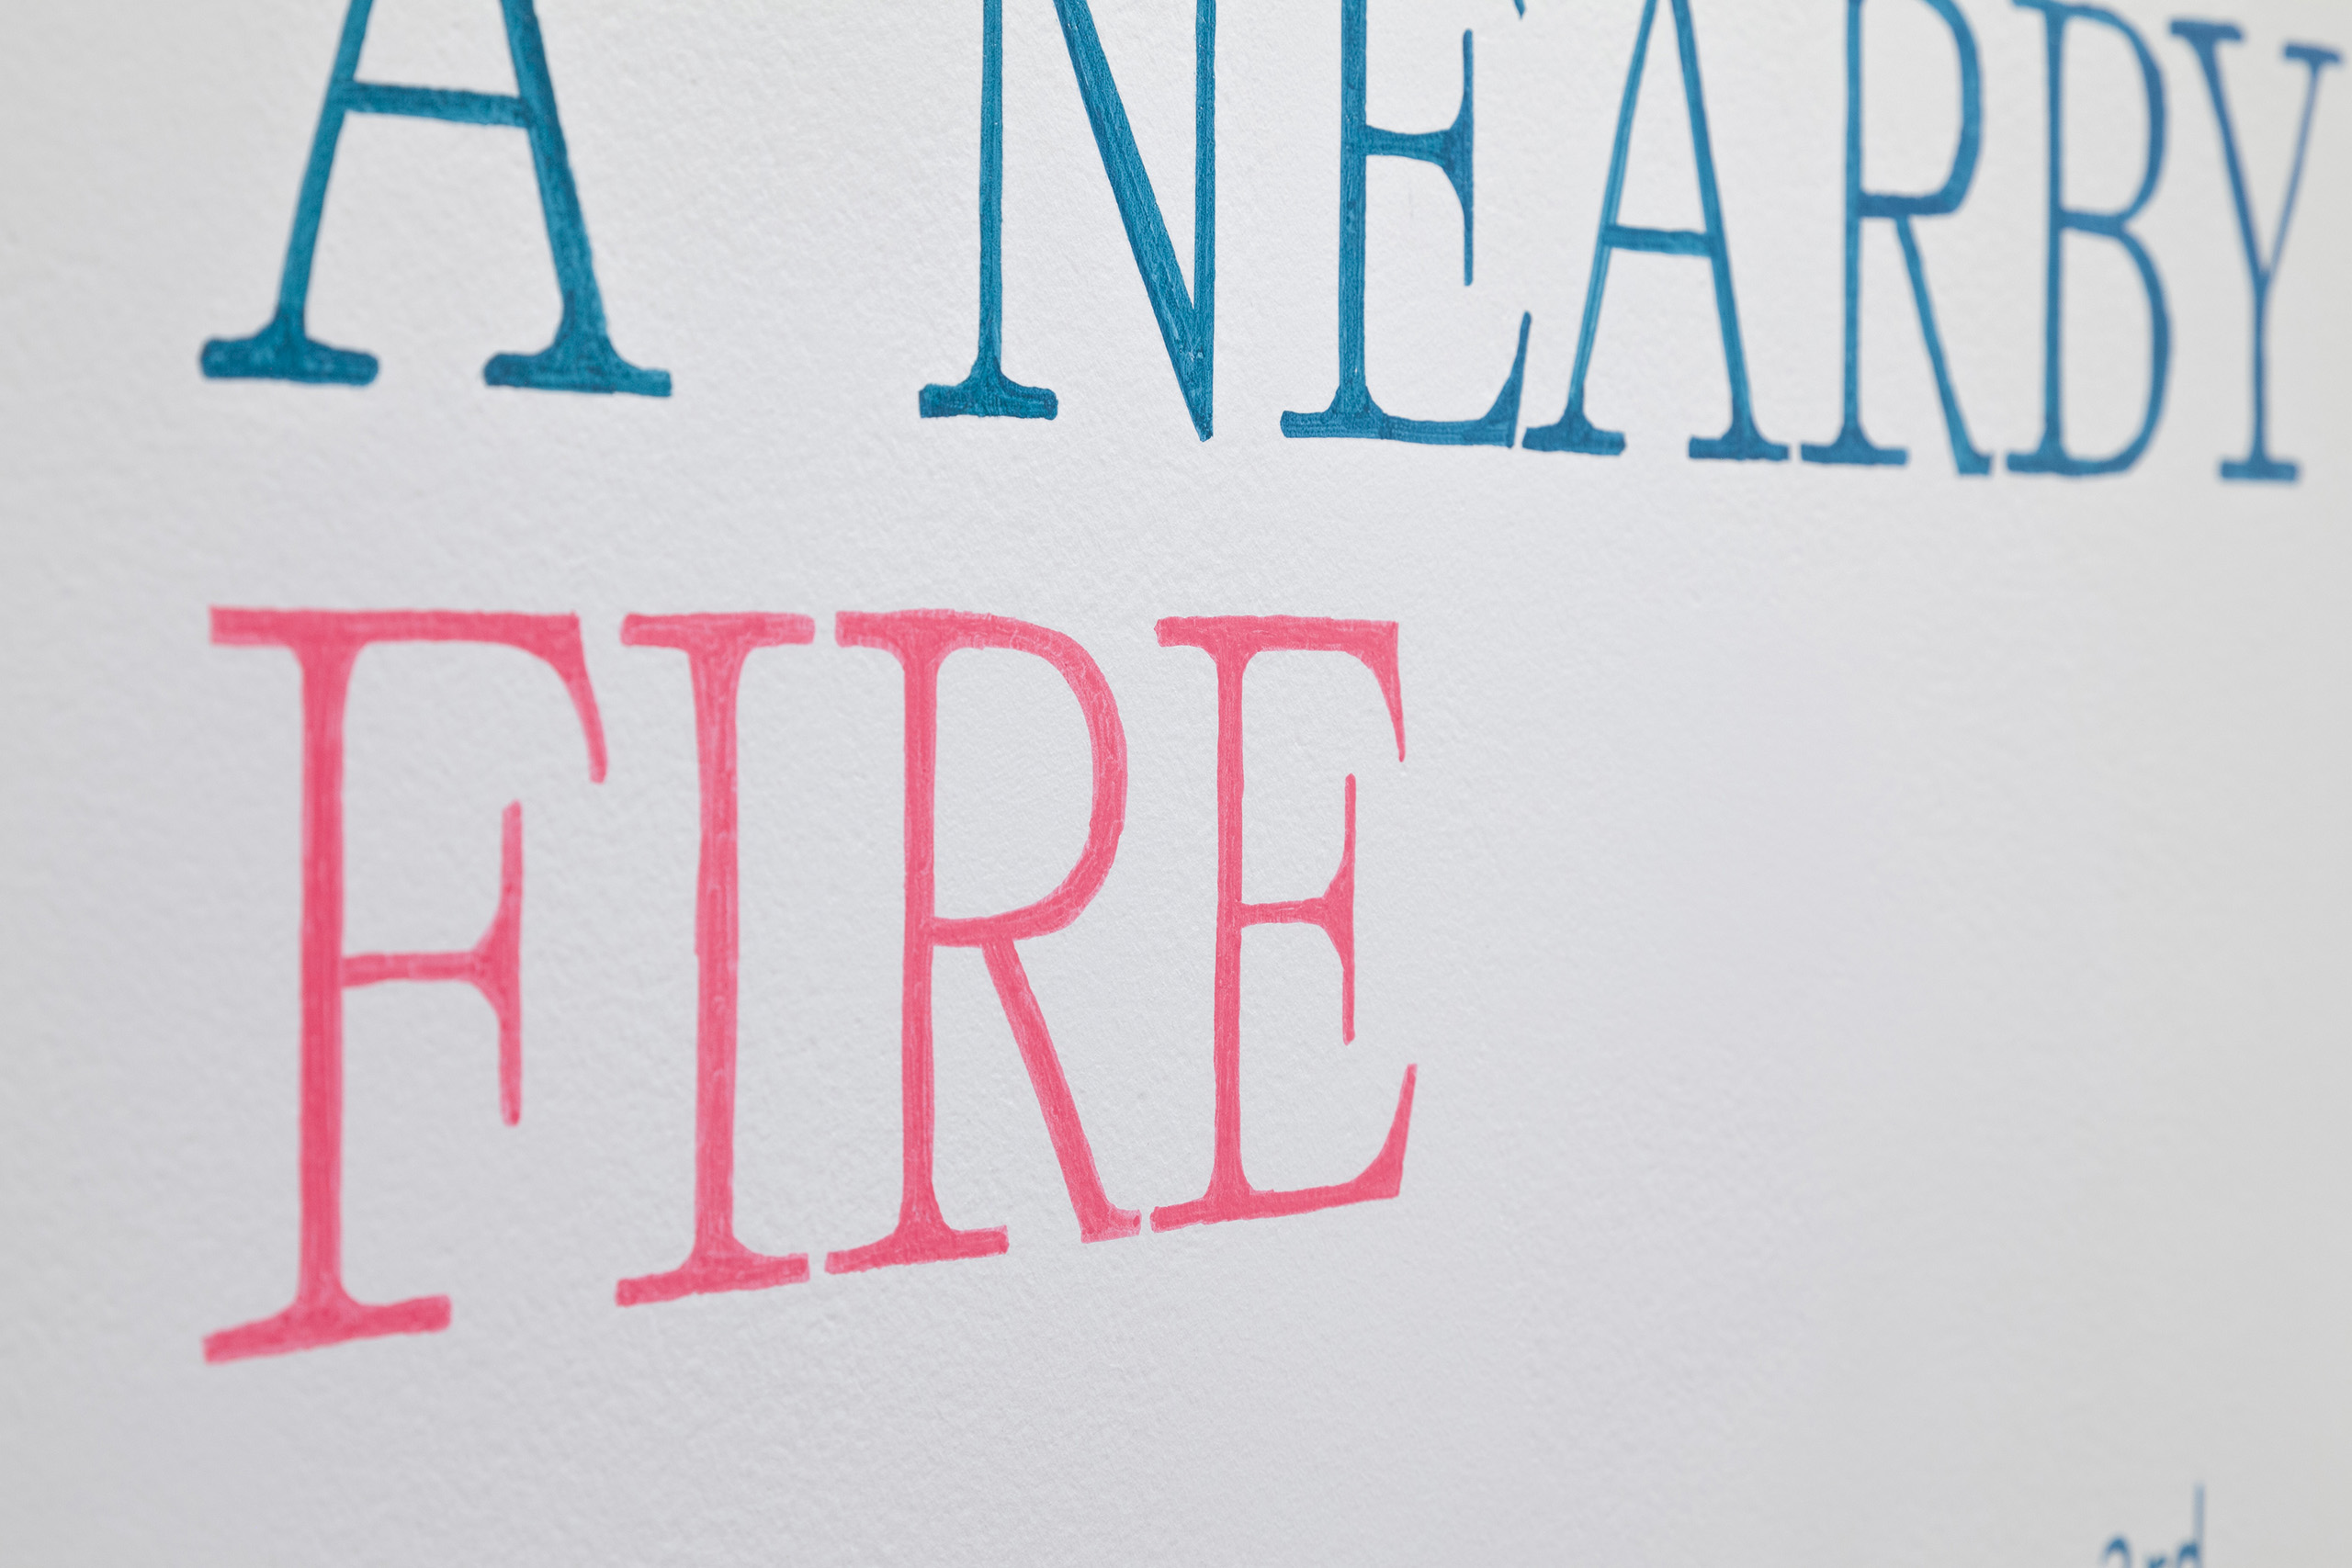 Close view of the words "A NEARBY FIRE" in teal and fushia